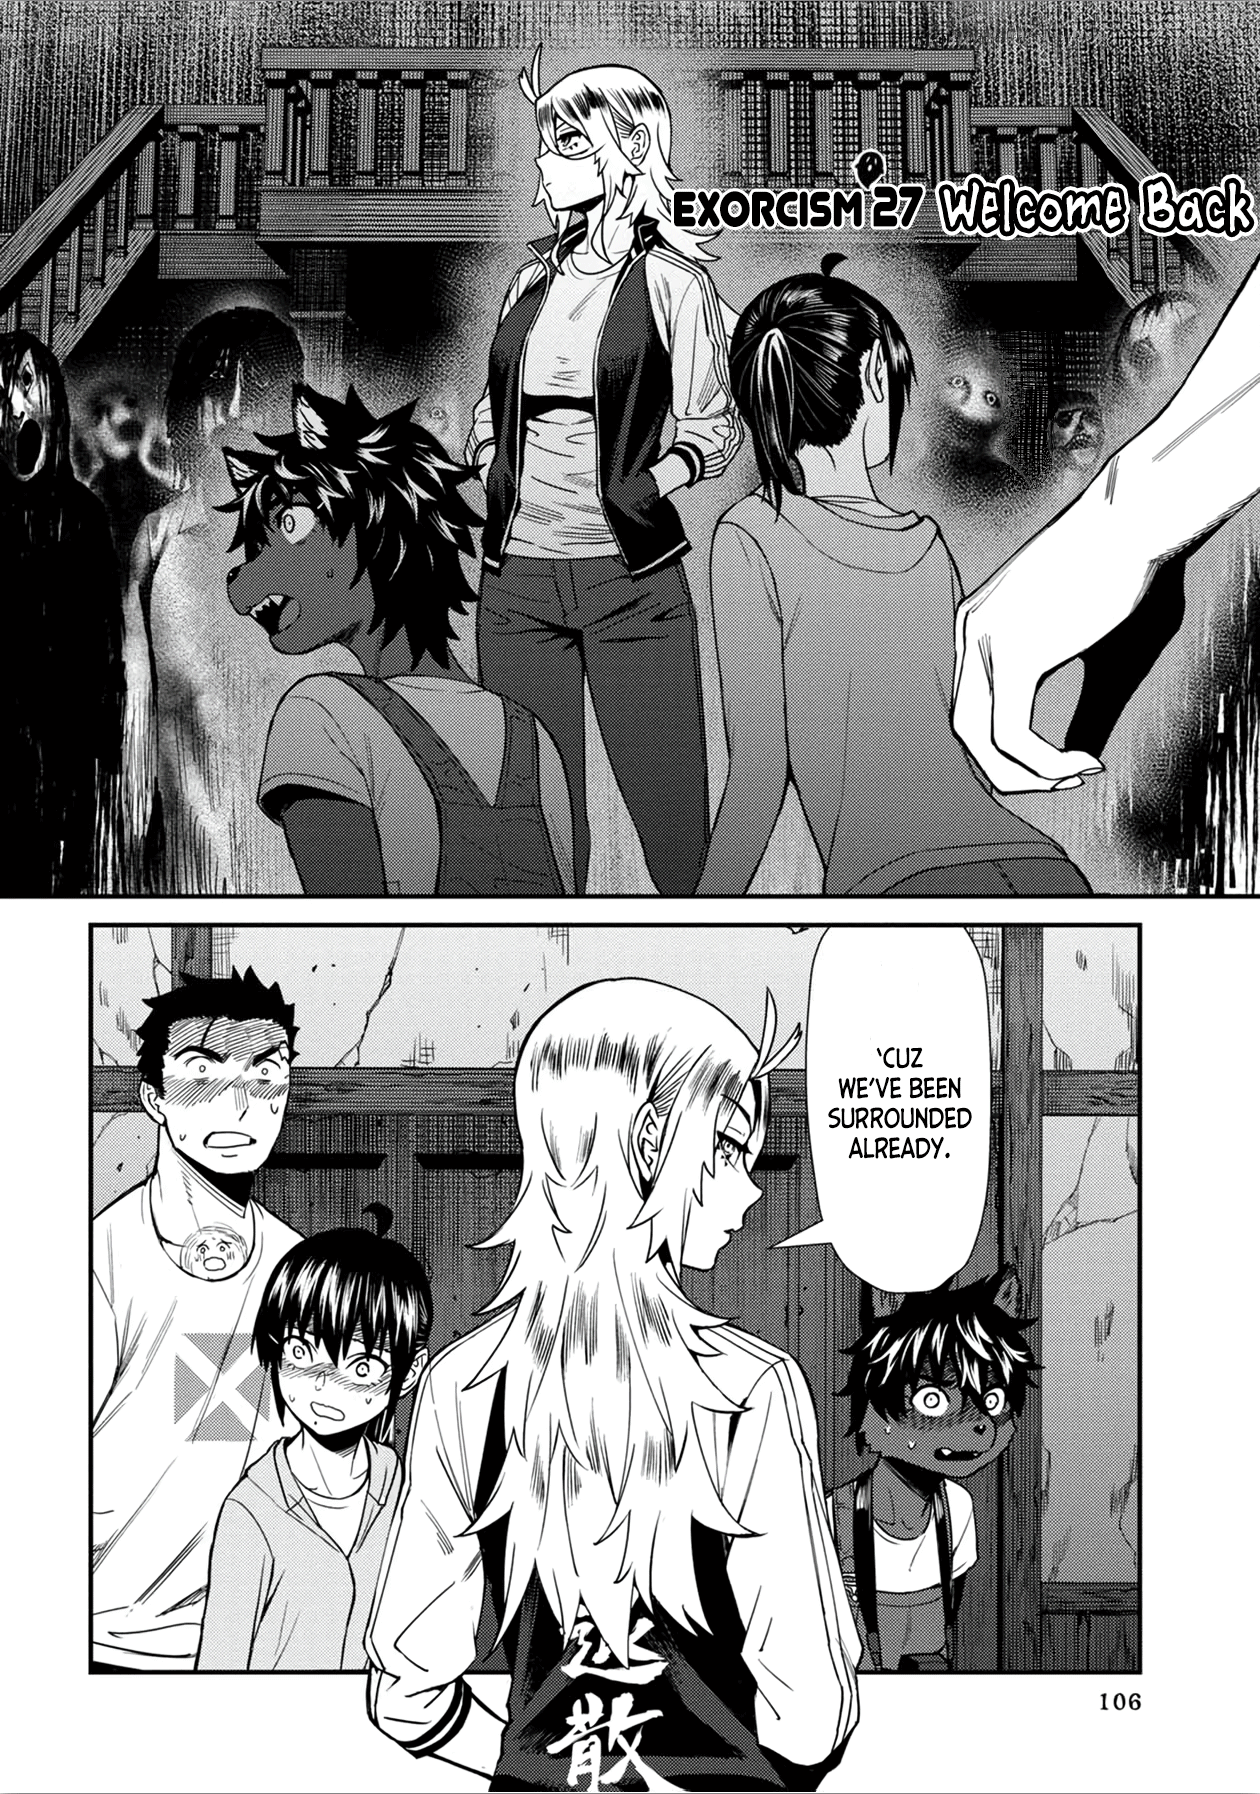 Bad Girl-Exorcist Reina Vol.3 Chapter 27: Exorcism #27 - Welcome Back - Picture 2